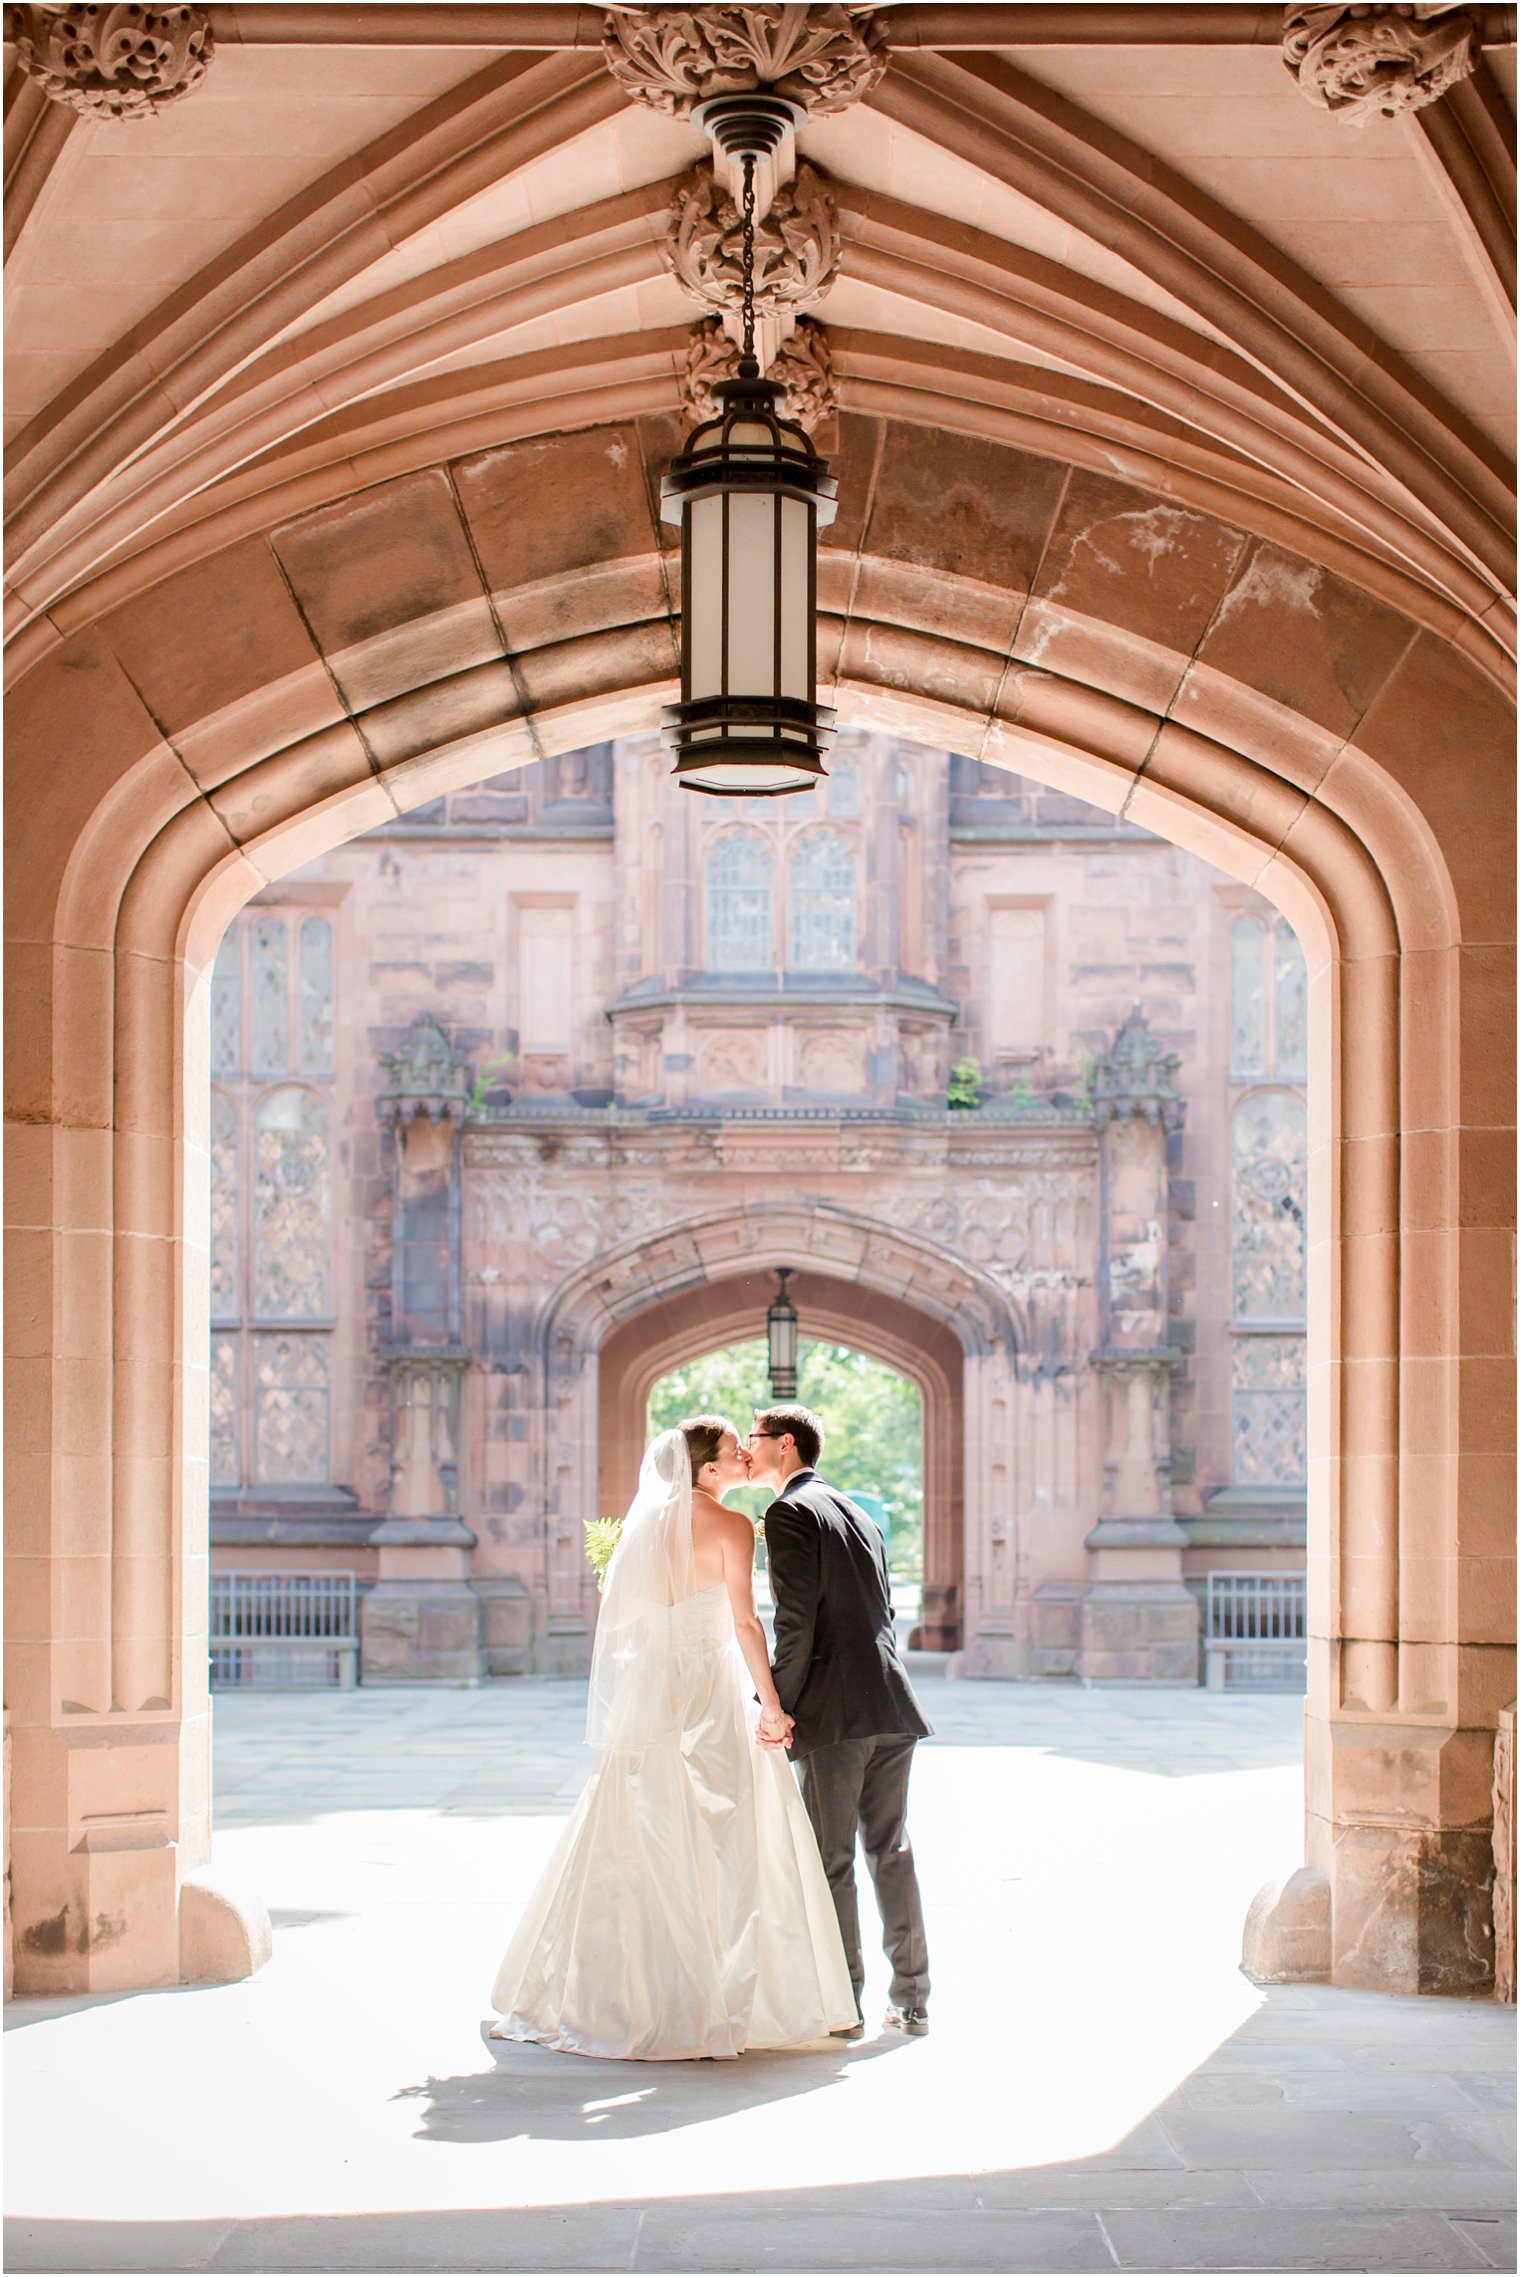 Bride and groom walking away under an arch at Princeton University